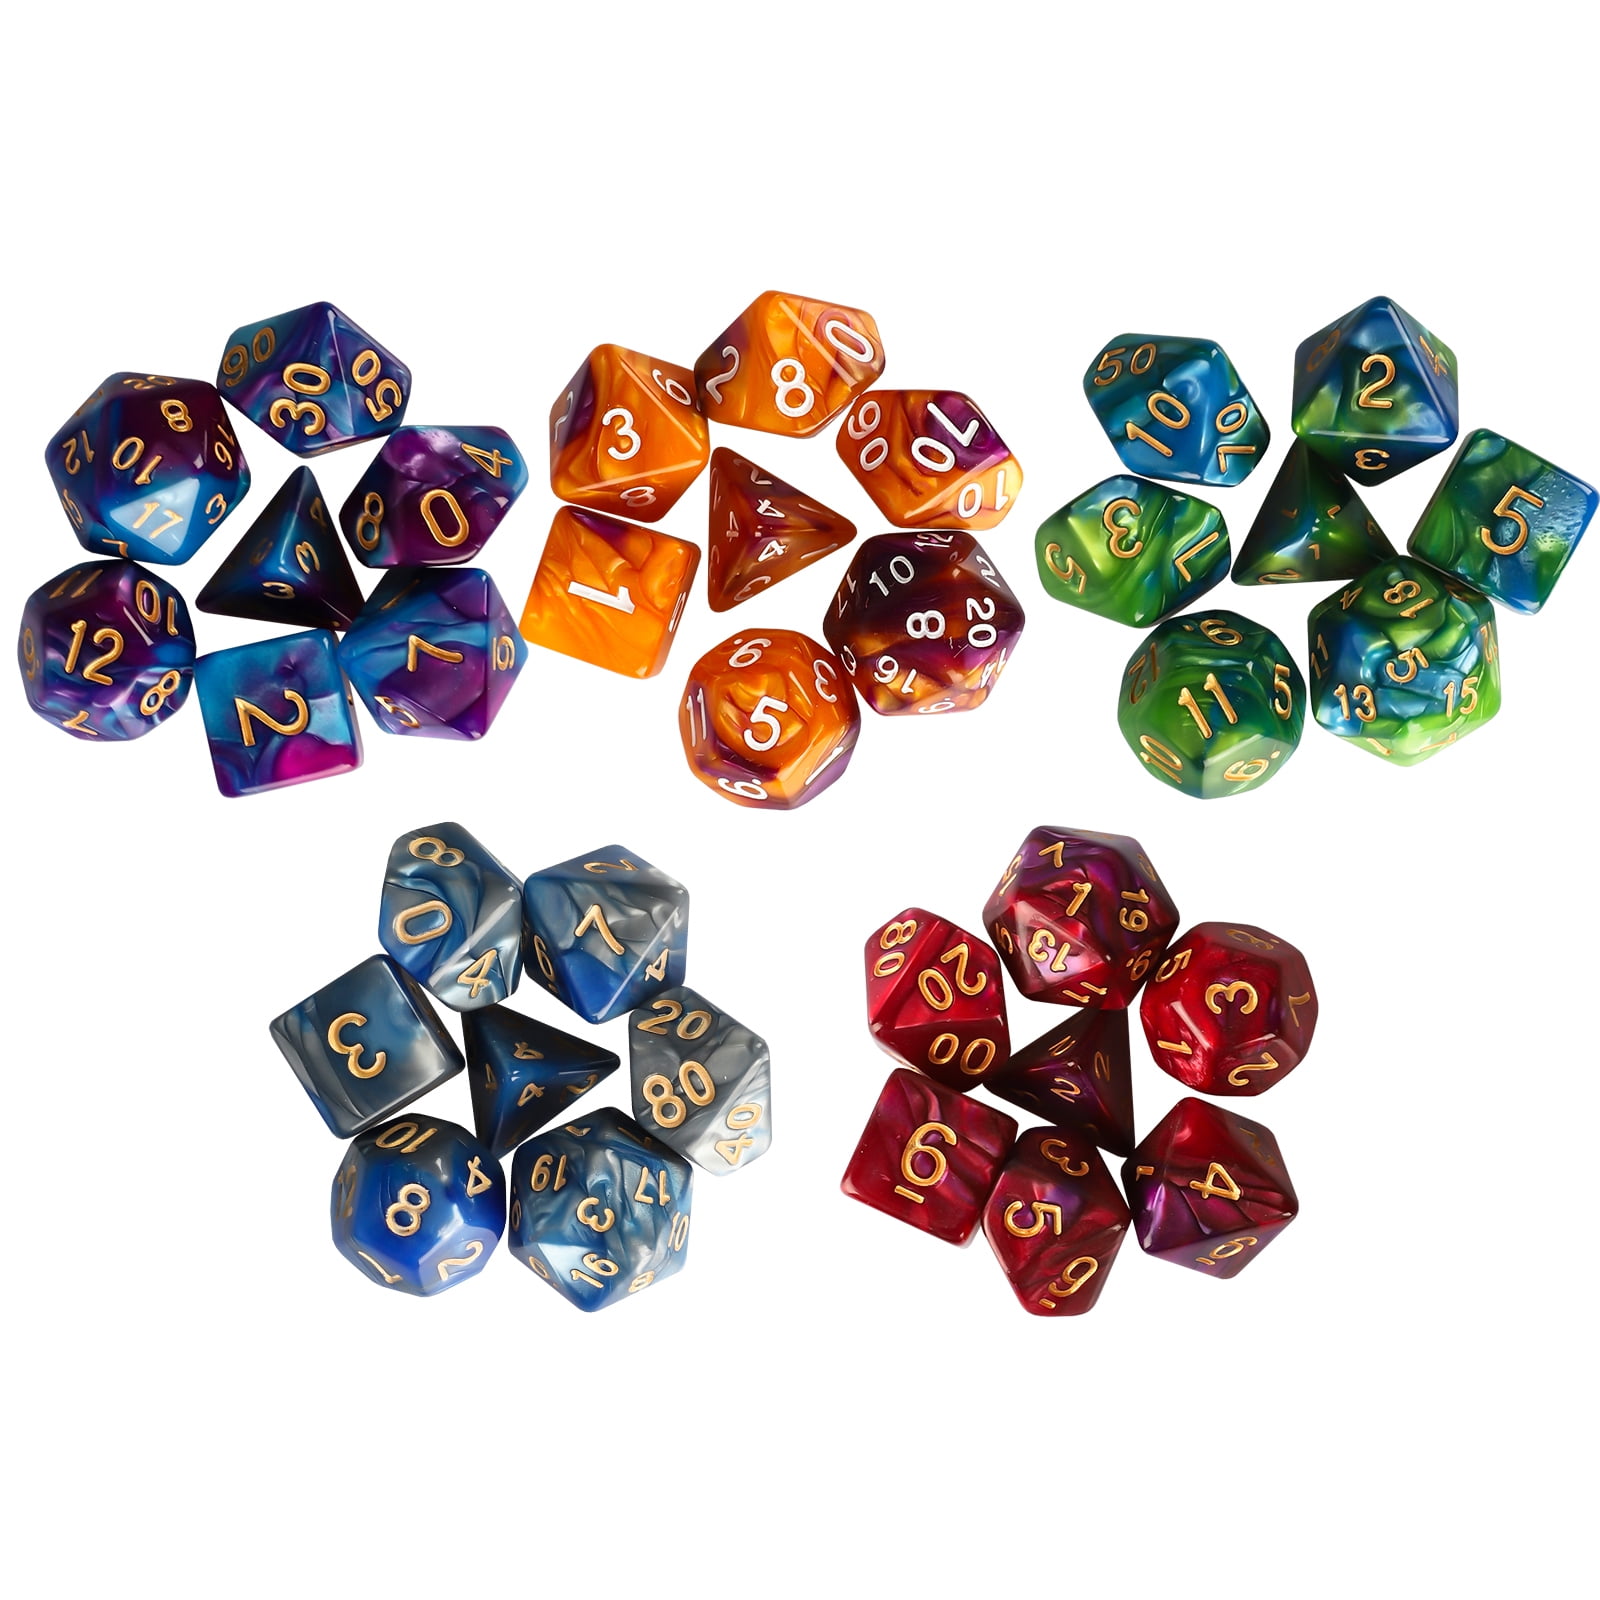 7pcs Polyhedral Acrylic Dungeons Dragons Dice Multiple Sides Role Playing GameVQ 